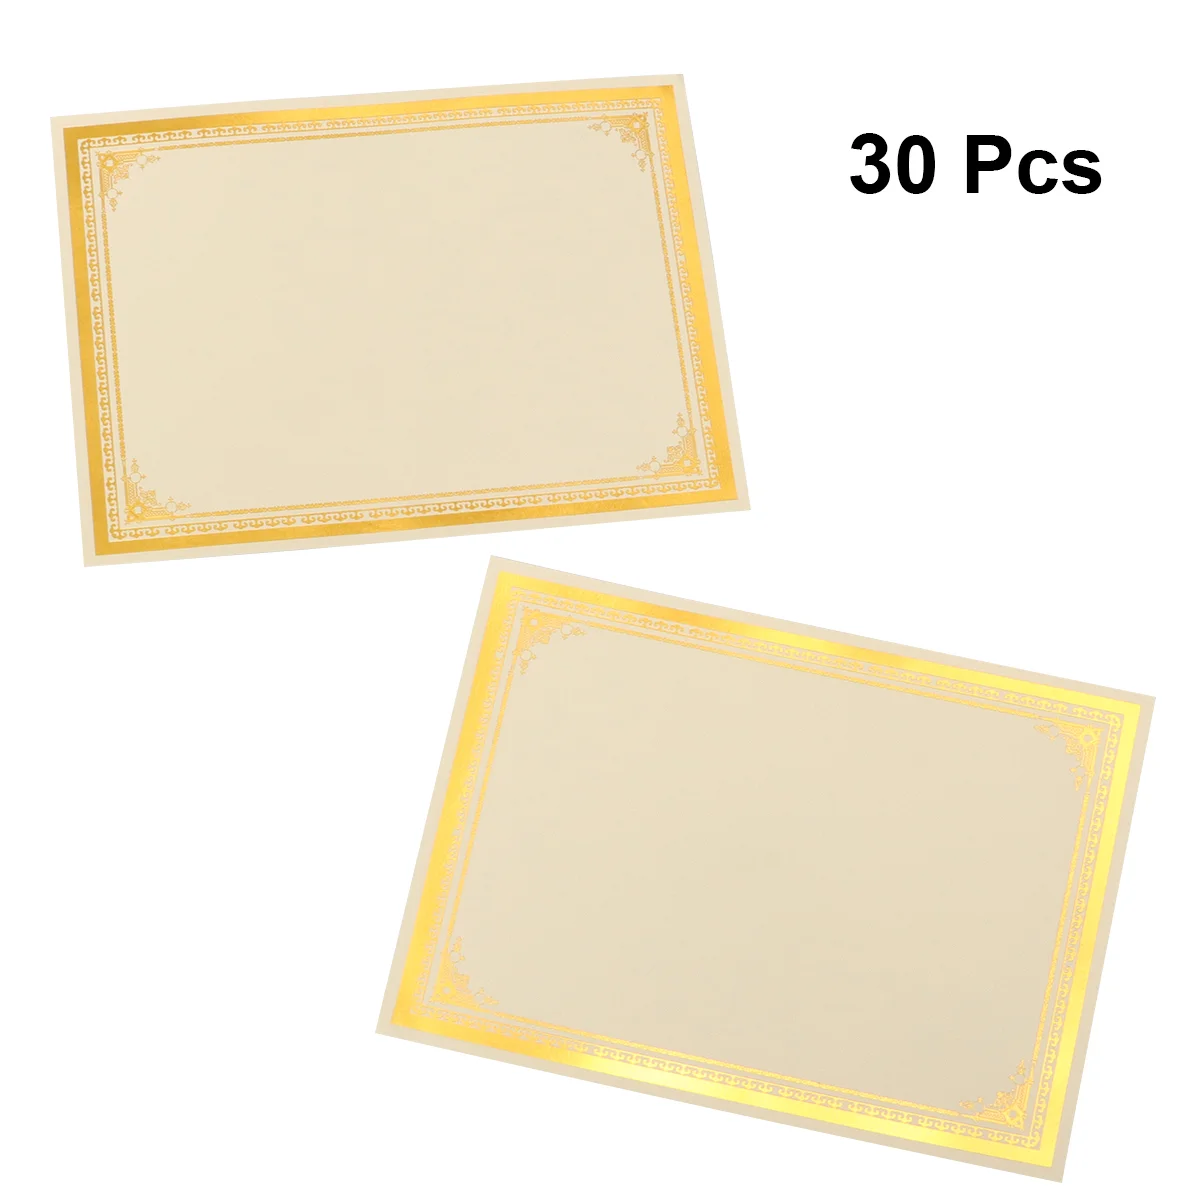 

30PCS Award Certificate Paper Blank A4 Paper Diploma Certificate Paper for Graduation Ceremony Office School (250g Gold Foil)